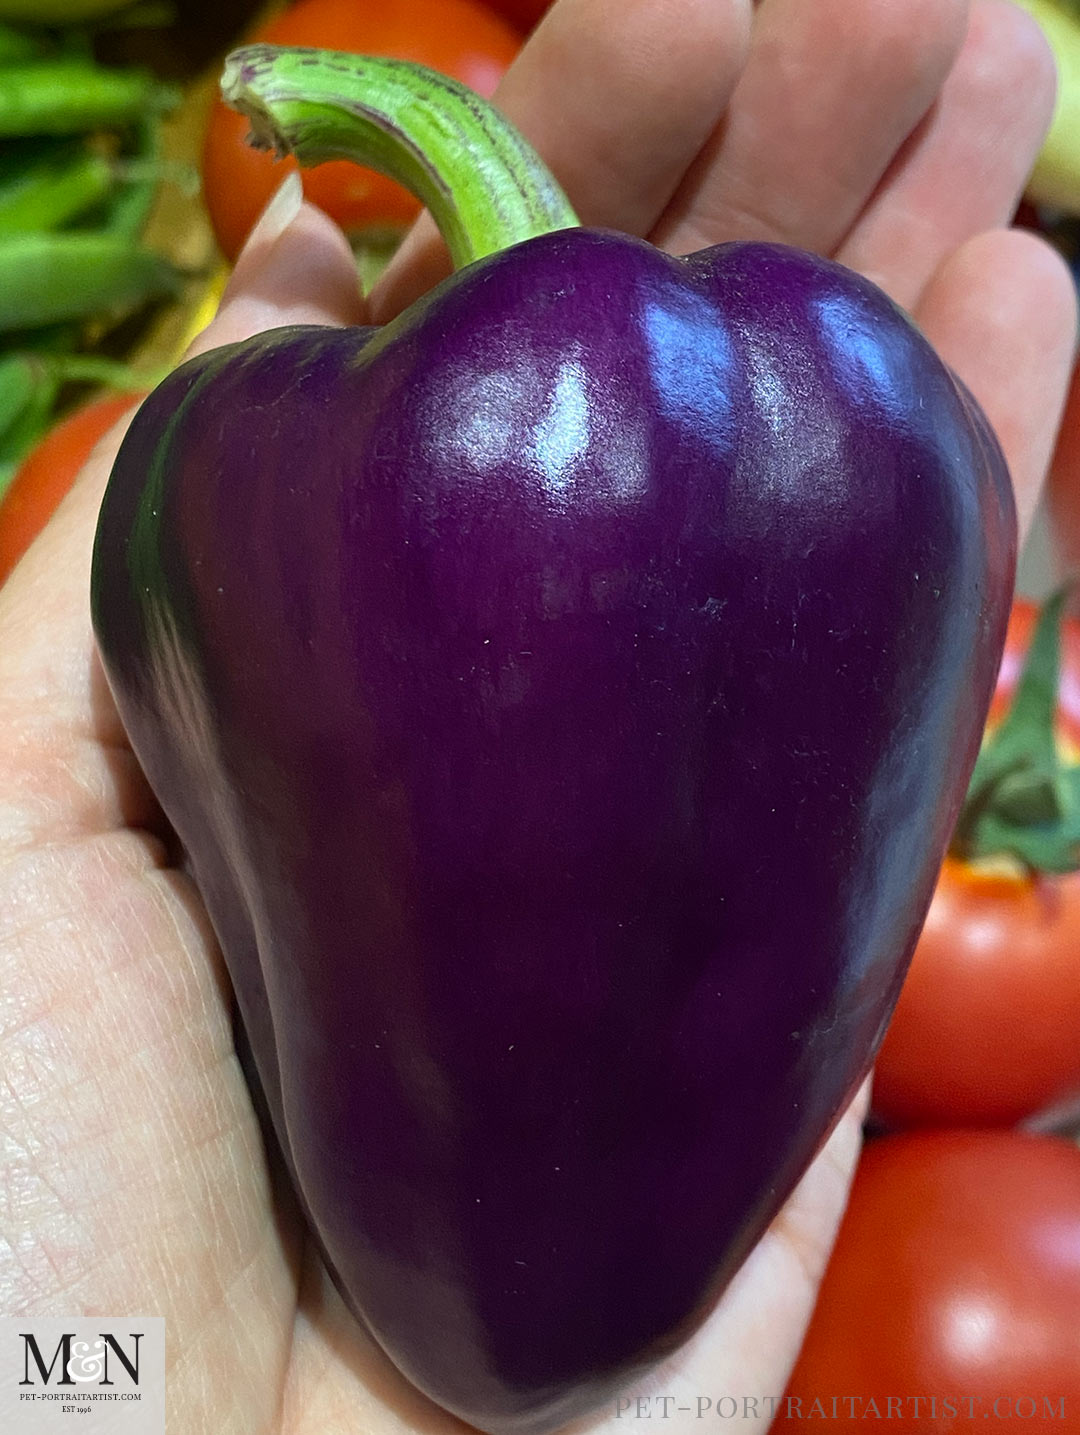 Melanie's September Monthly News - Dads peppers 